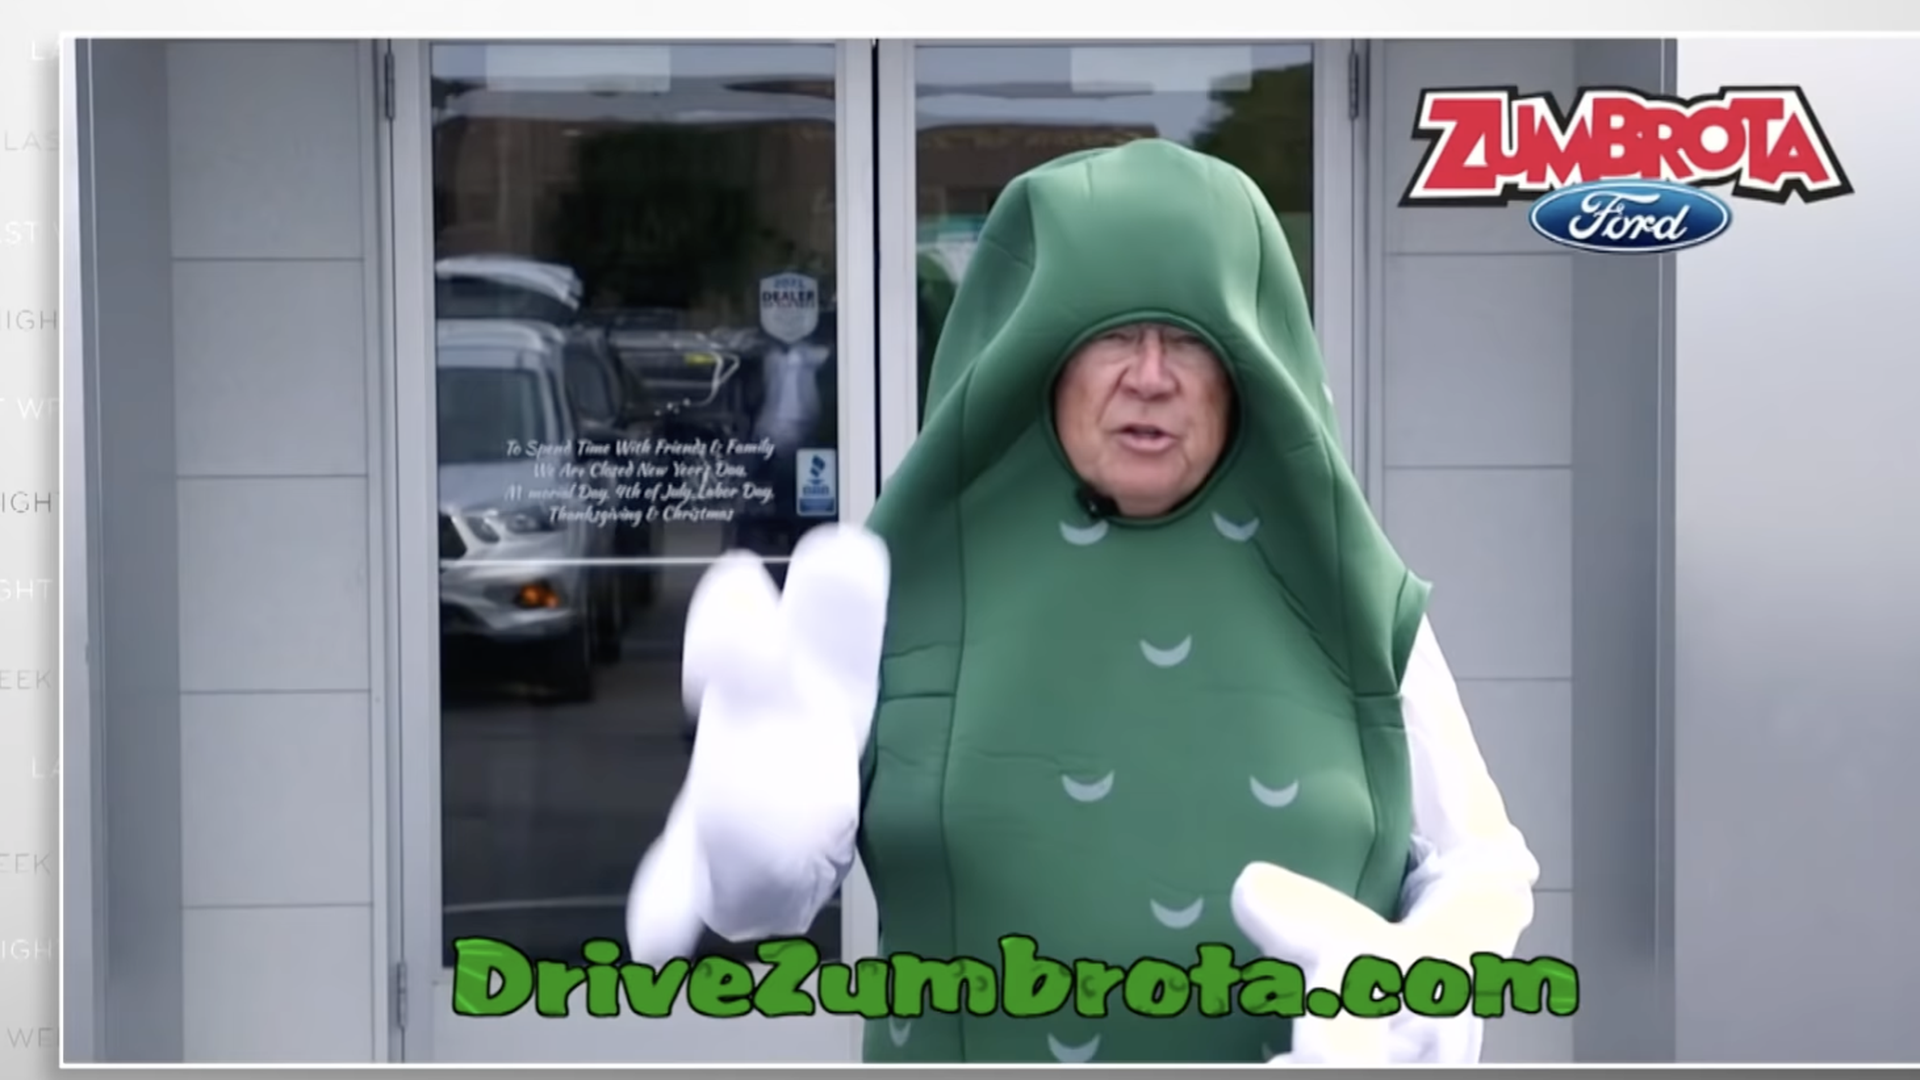 Steve Johnson of Zumbrota Ford wears a pickle costume in a commercial for John Oliver's "Last Week Tonight" 